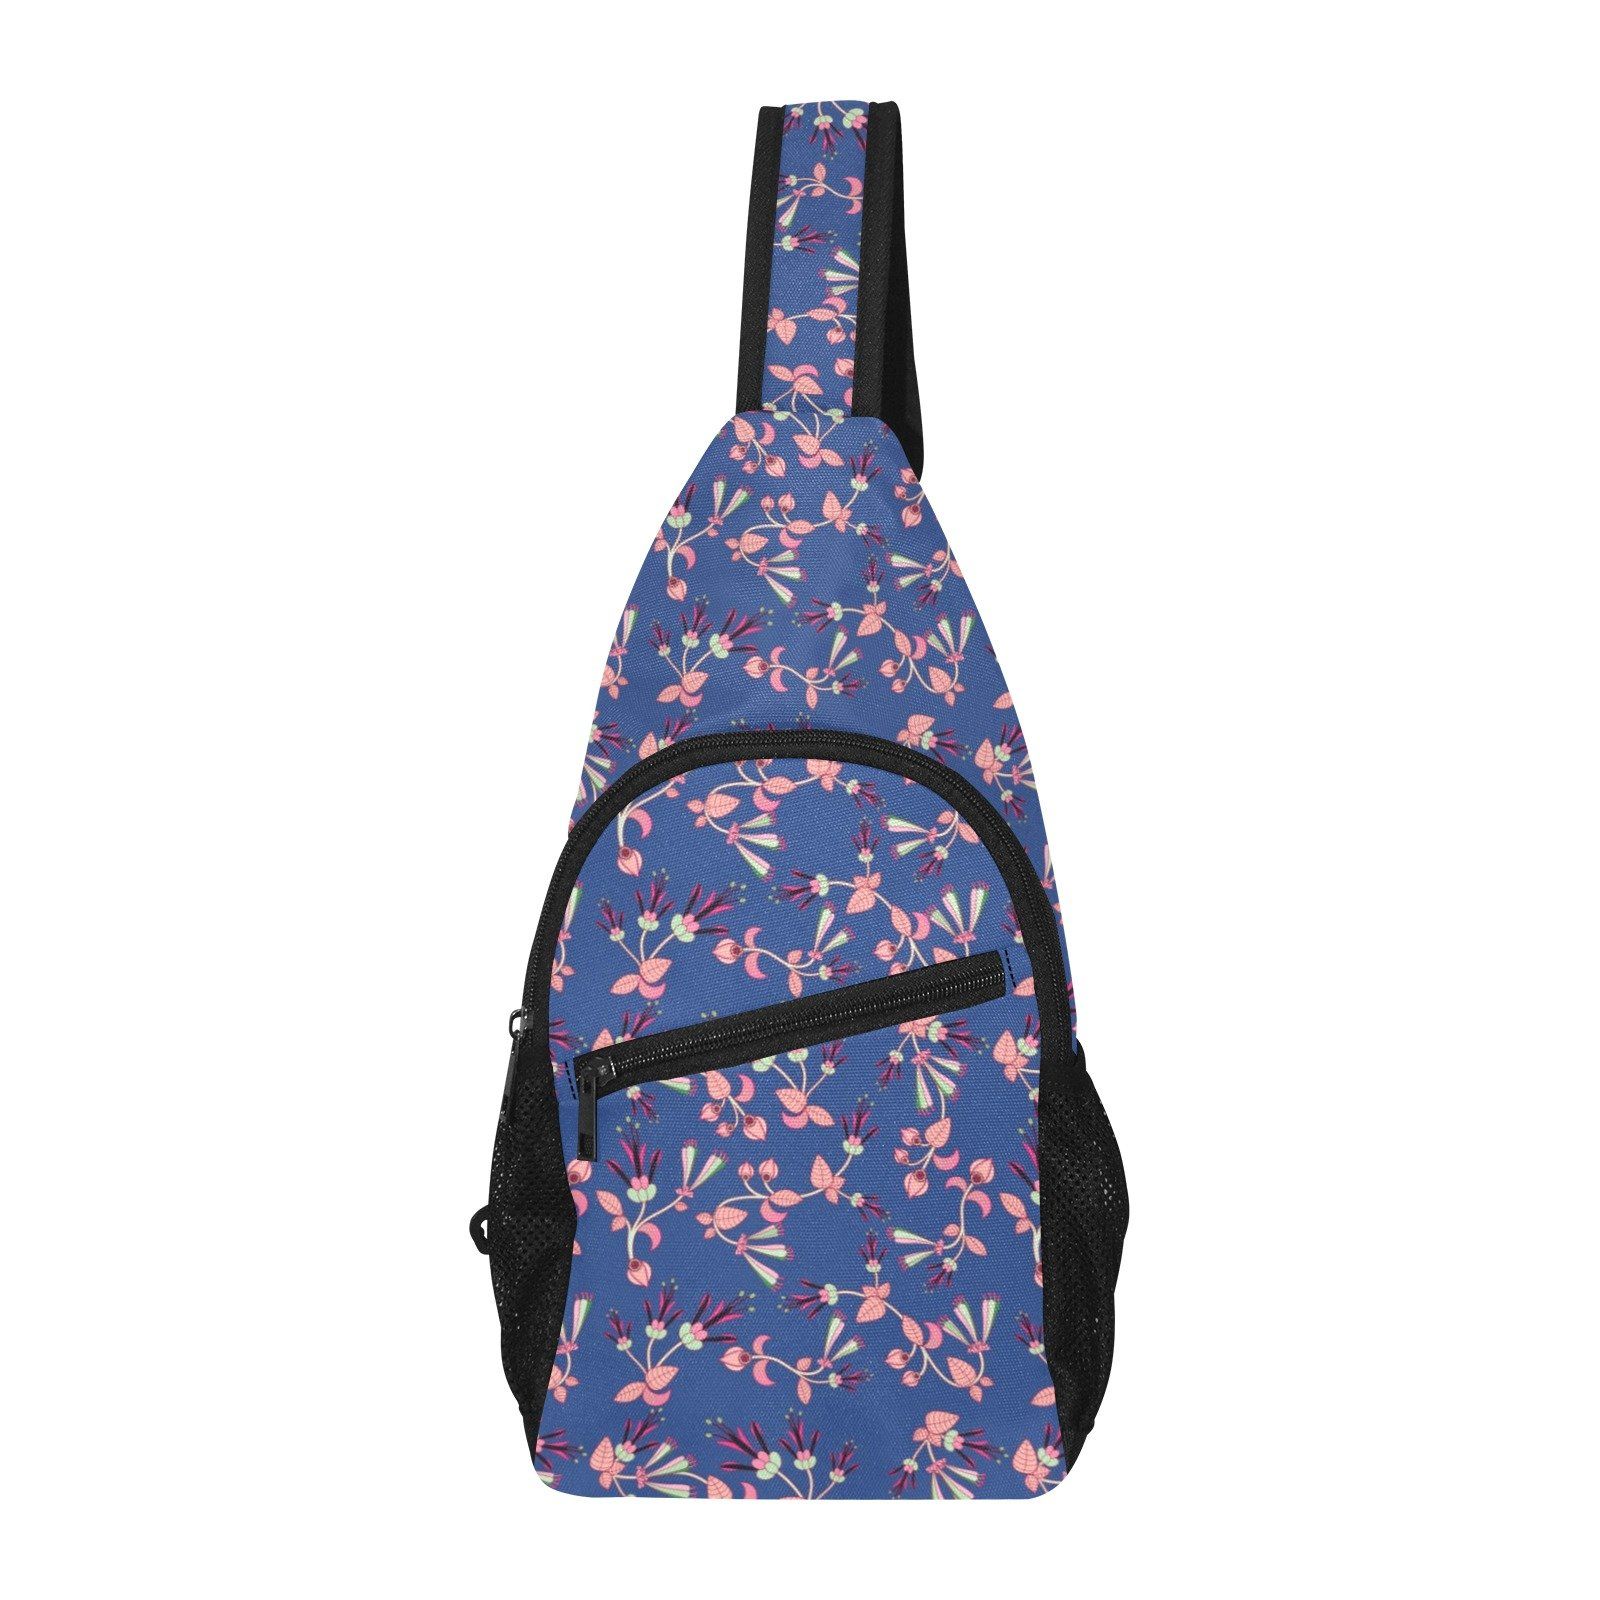 Swift Floral Peach Blue All Over Print Chest Bag (Model 1719) All Over Print Chest Bag (1719) e-joyer 